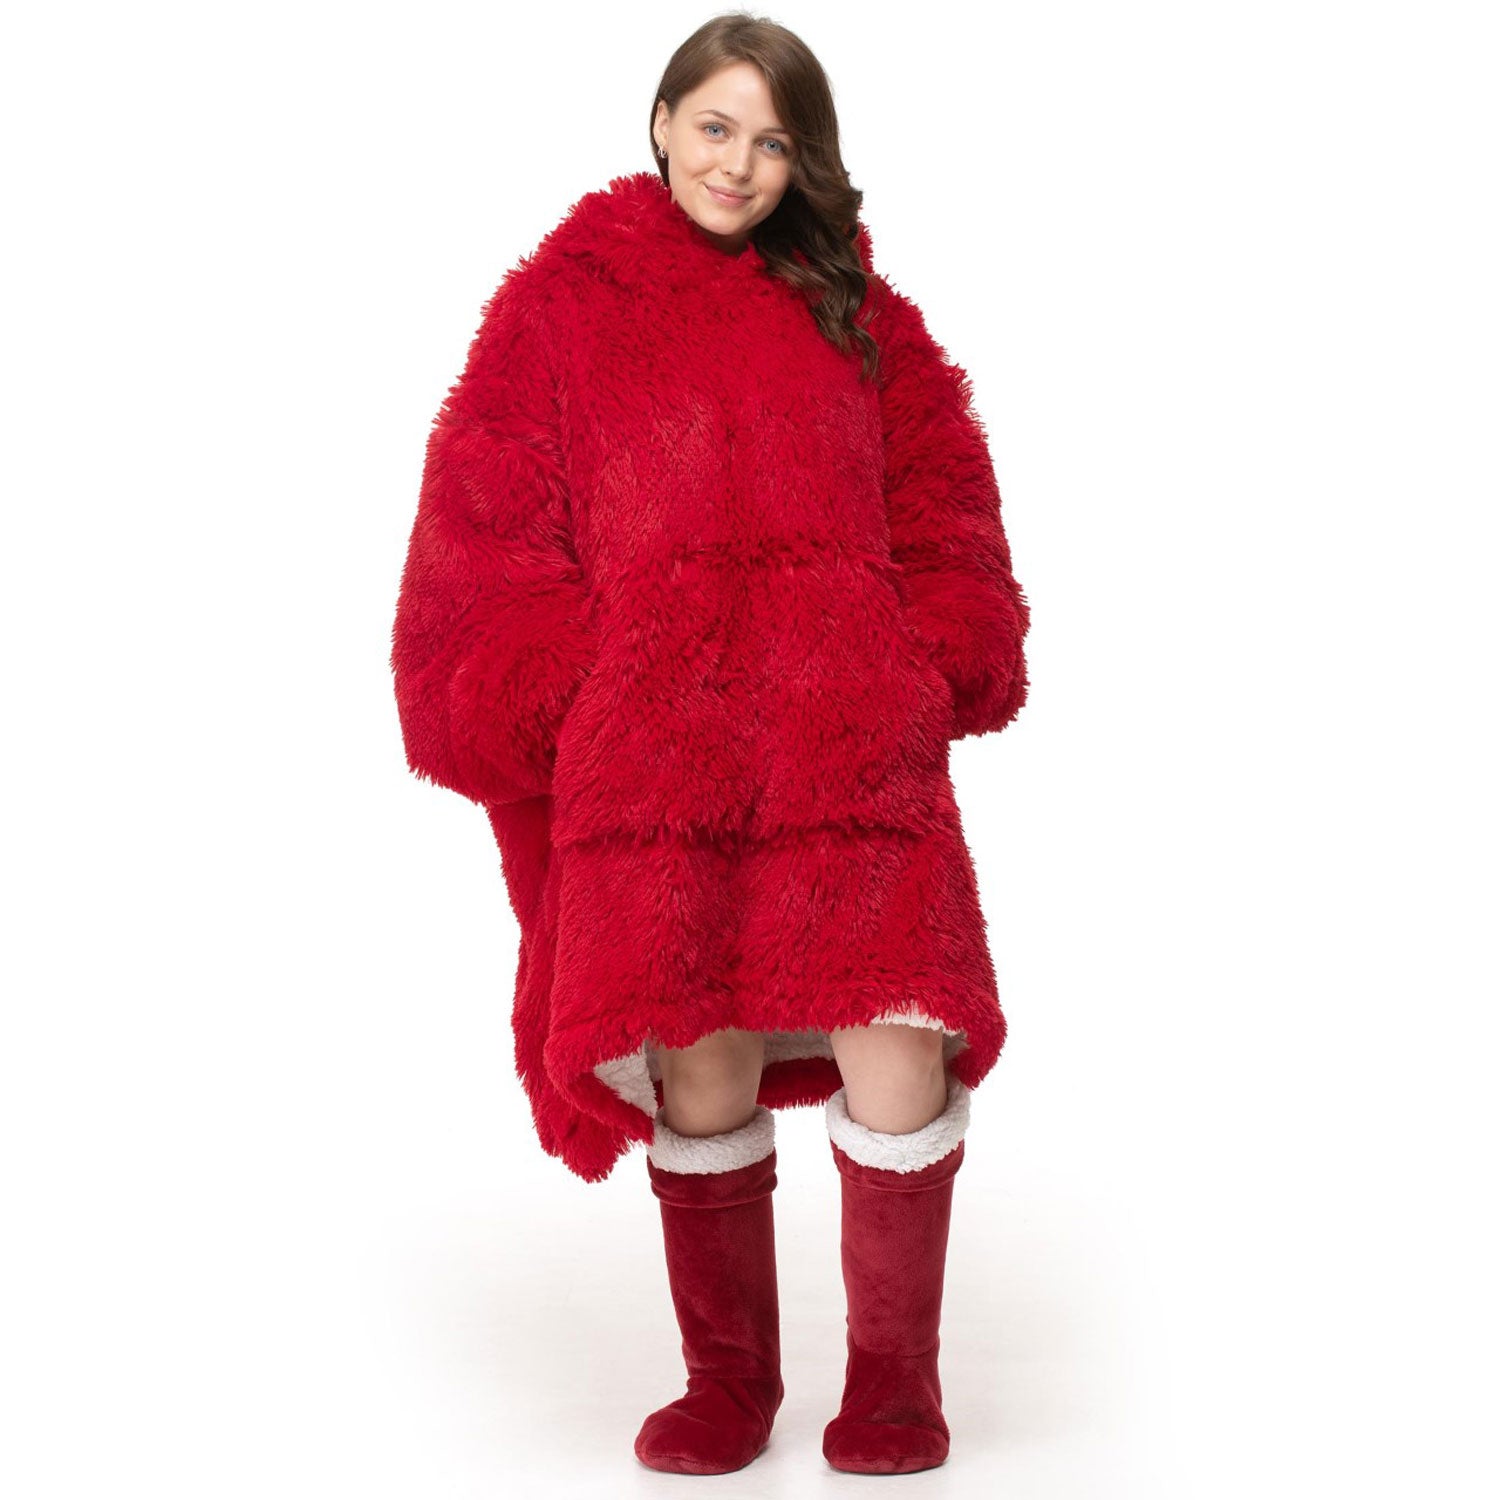 The Home Collection Alaska Hooded Robe - Red 1 Shaws Department Stores